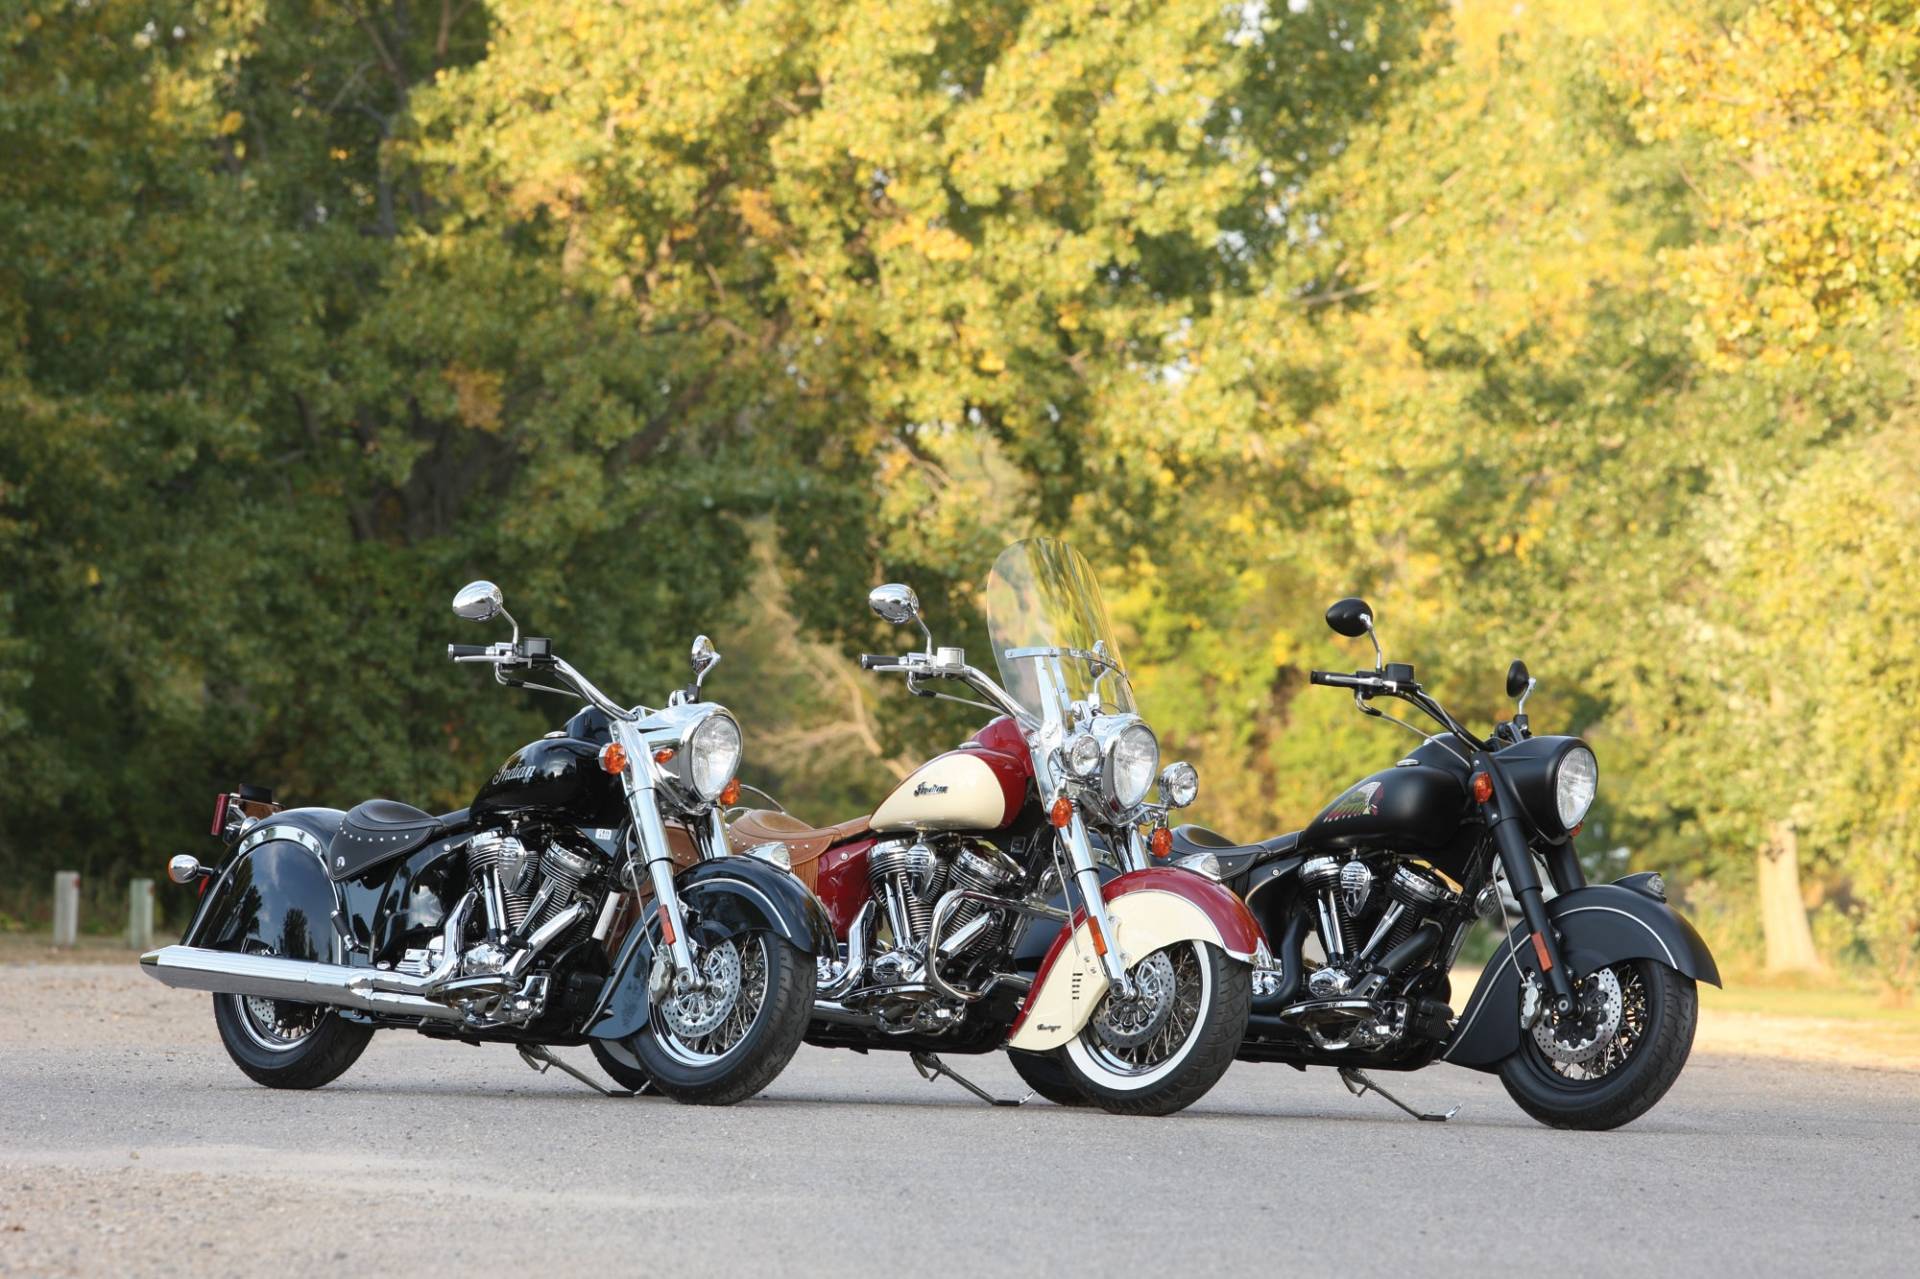 Introducing the new 2012 indian motorcycles